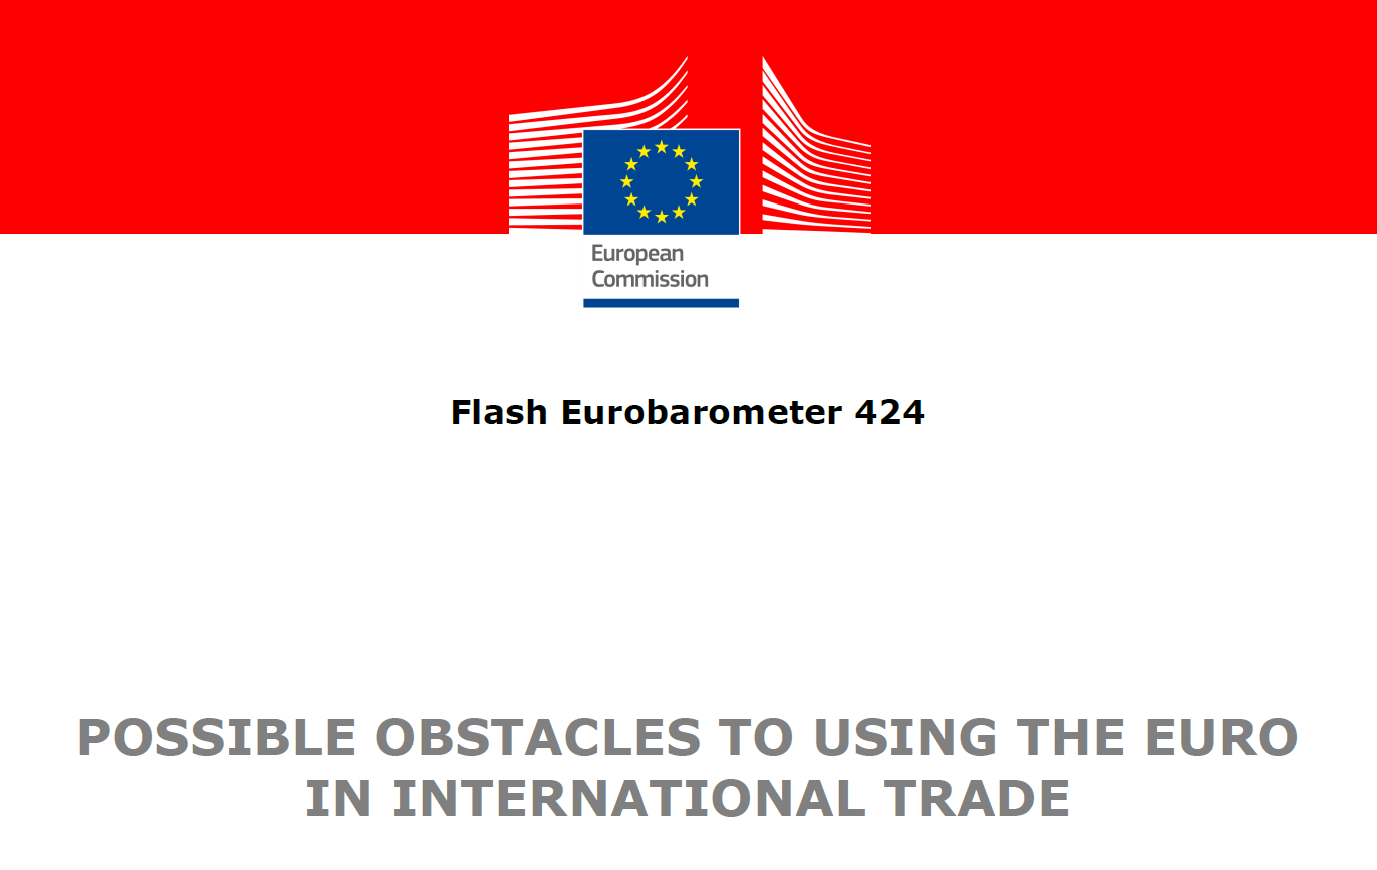 Eurobarometer: The role of the euro in international trade